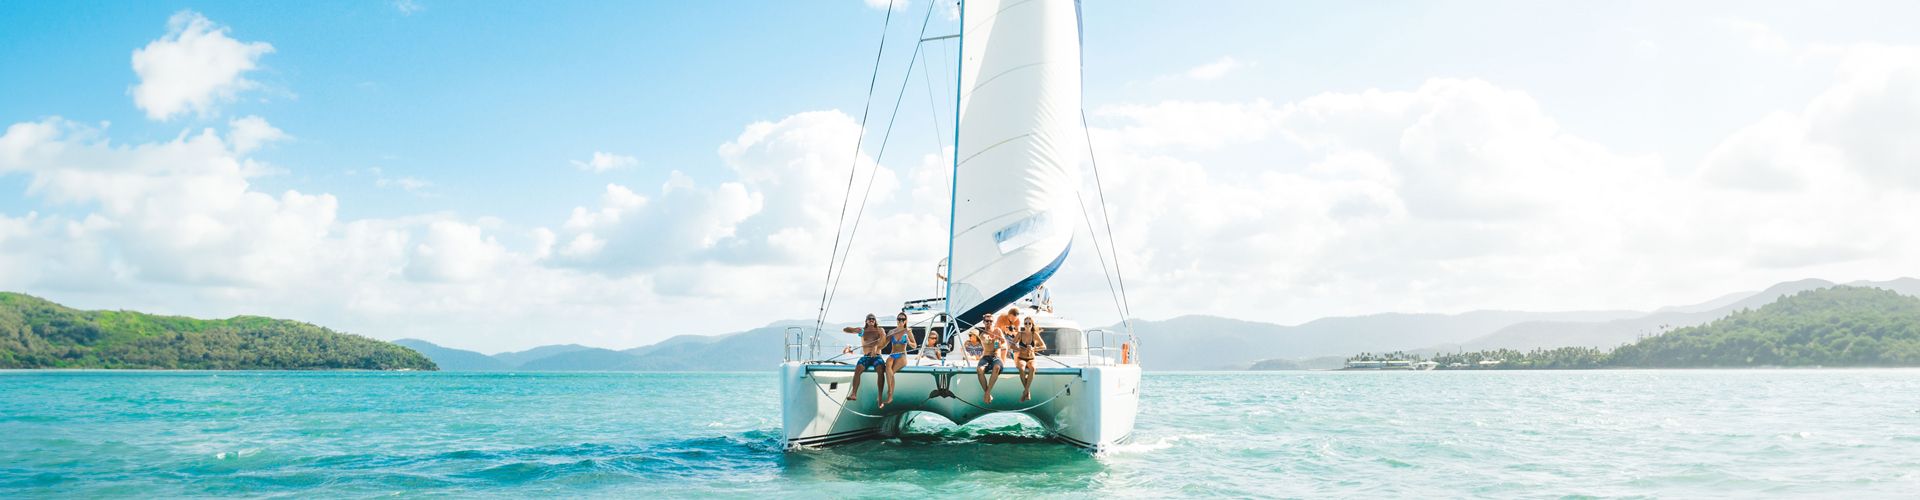 Air Conditioned Boats - Sailing Whitsunday Image